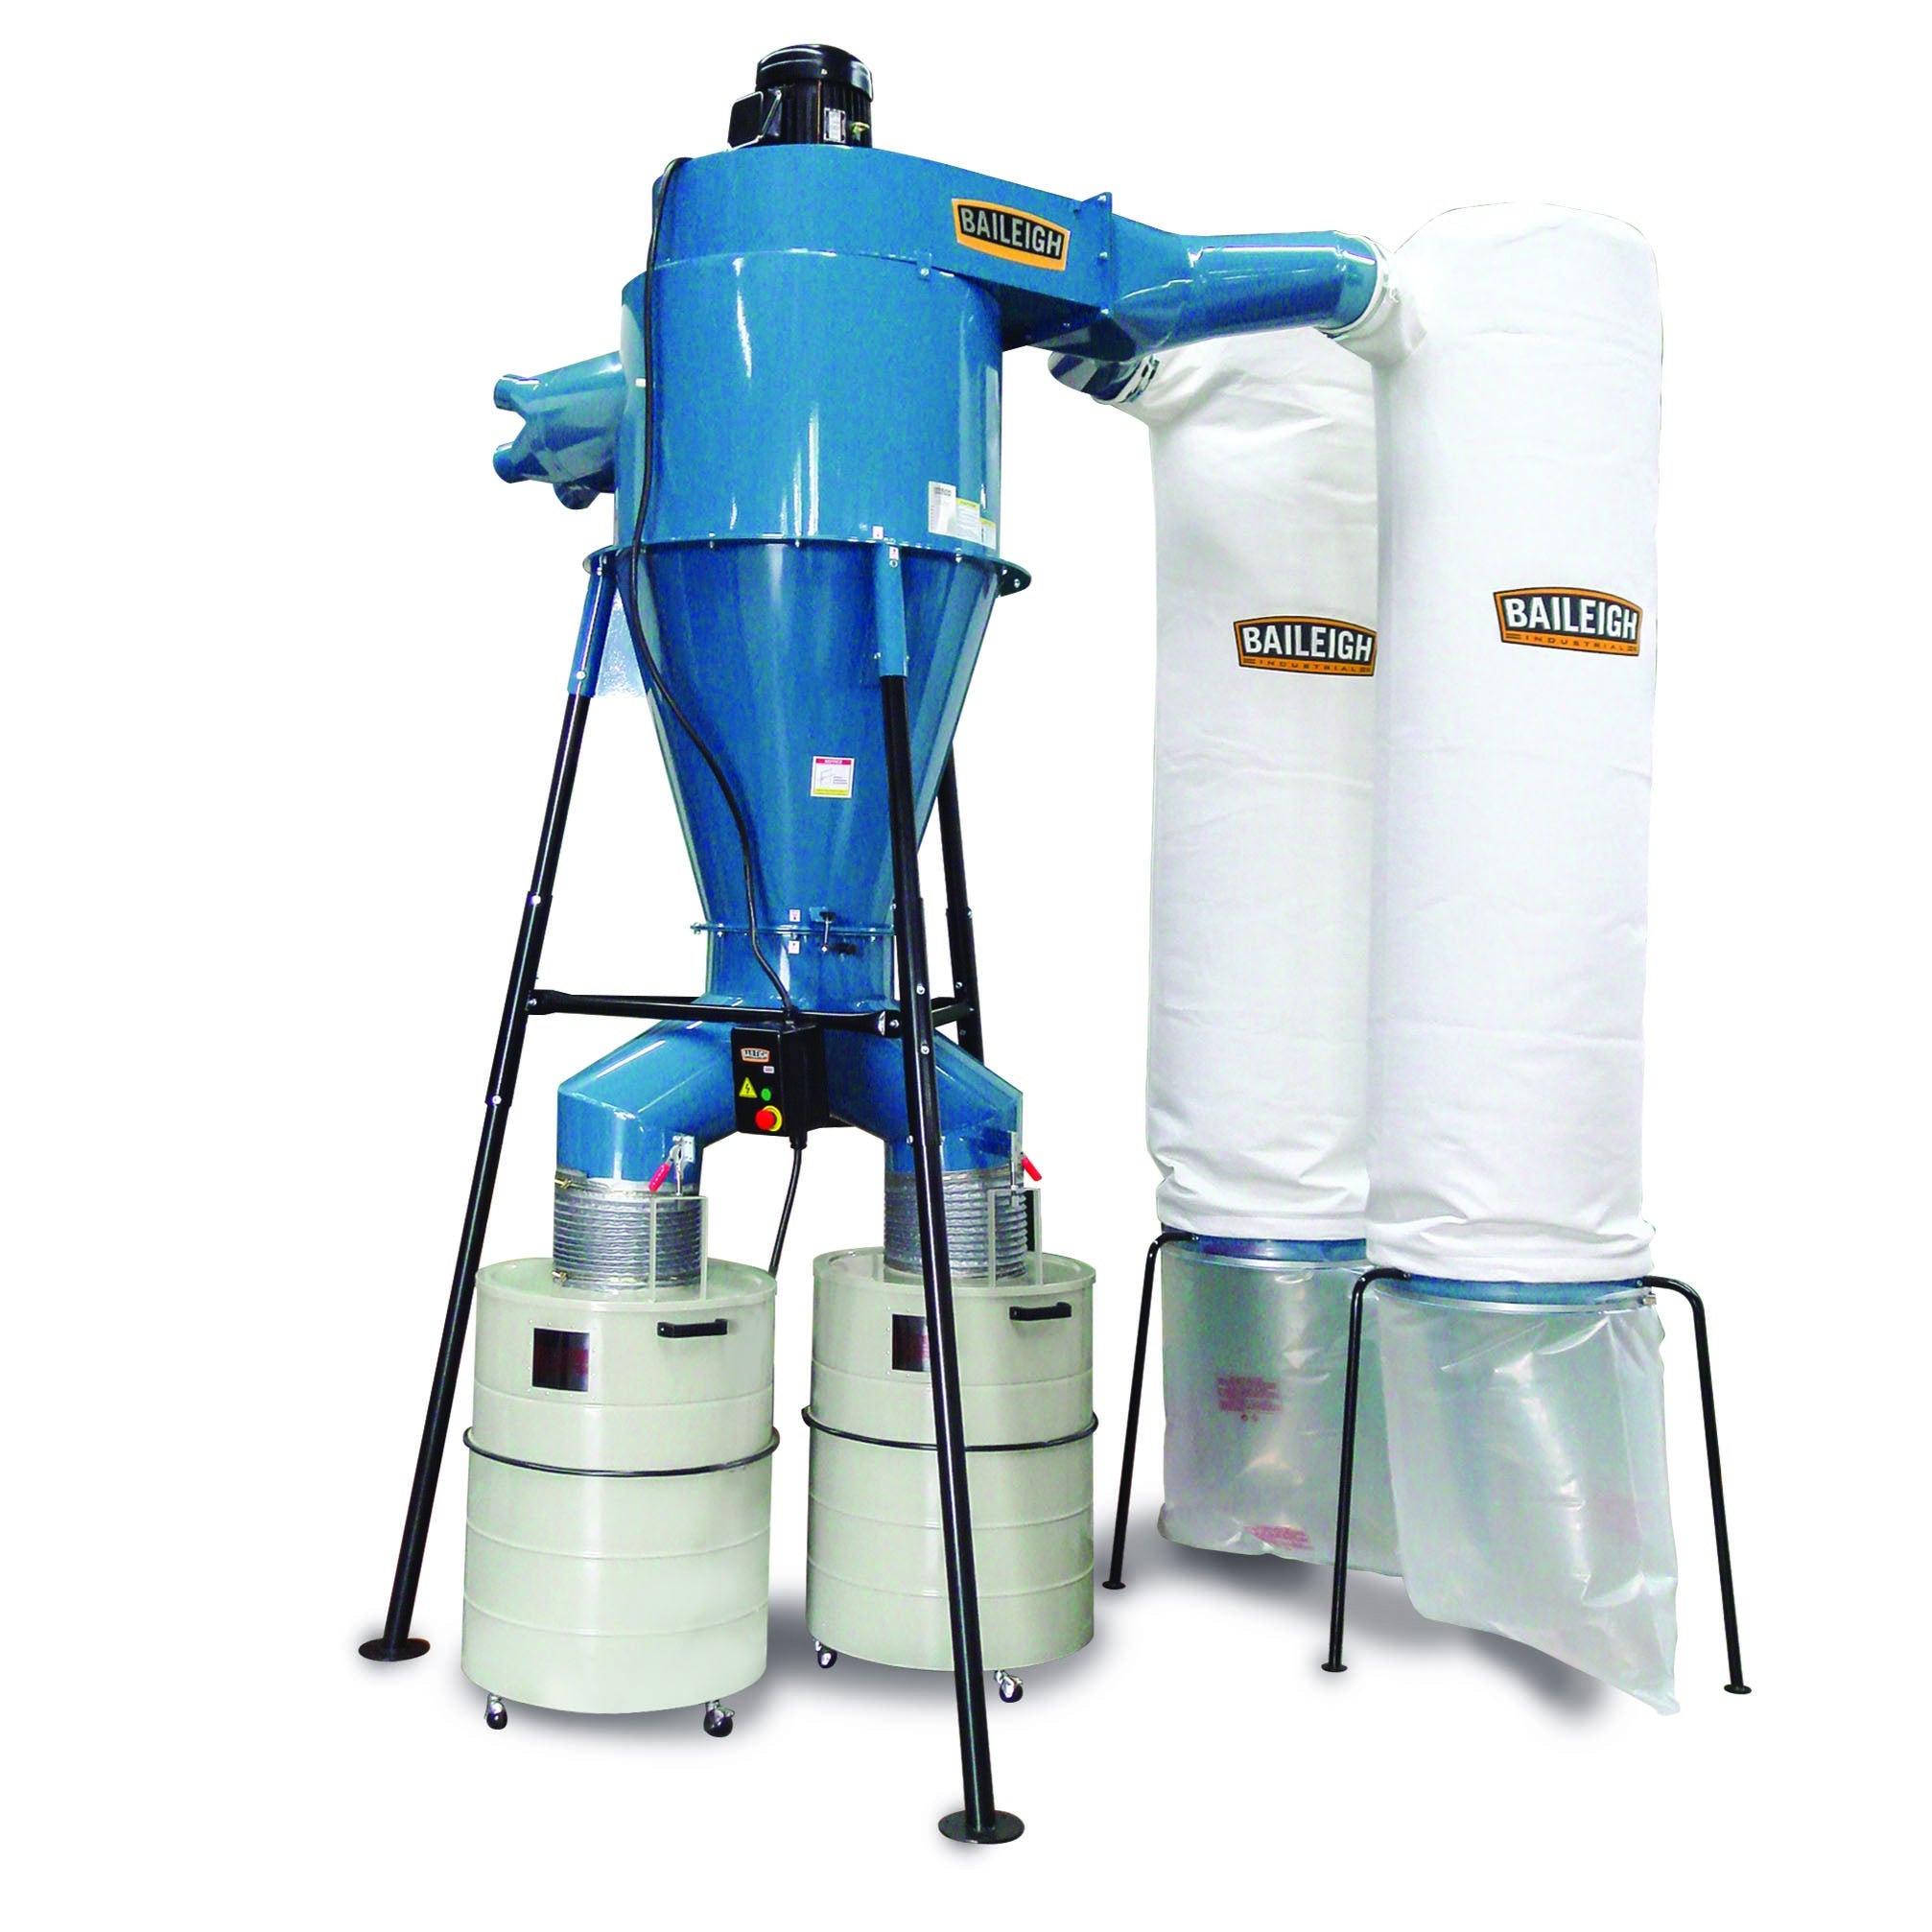 Baileigh DC-6000C 10HP 440V 3 Phase Cyclone Style Dust Collector with Remote Start and 1 Micron Bag Filters, 6000 CFM